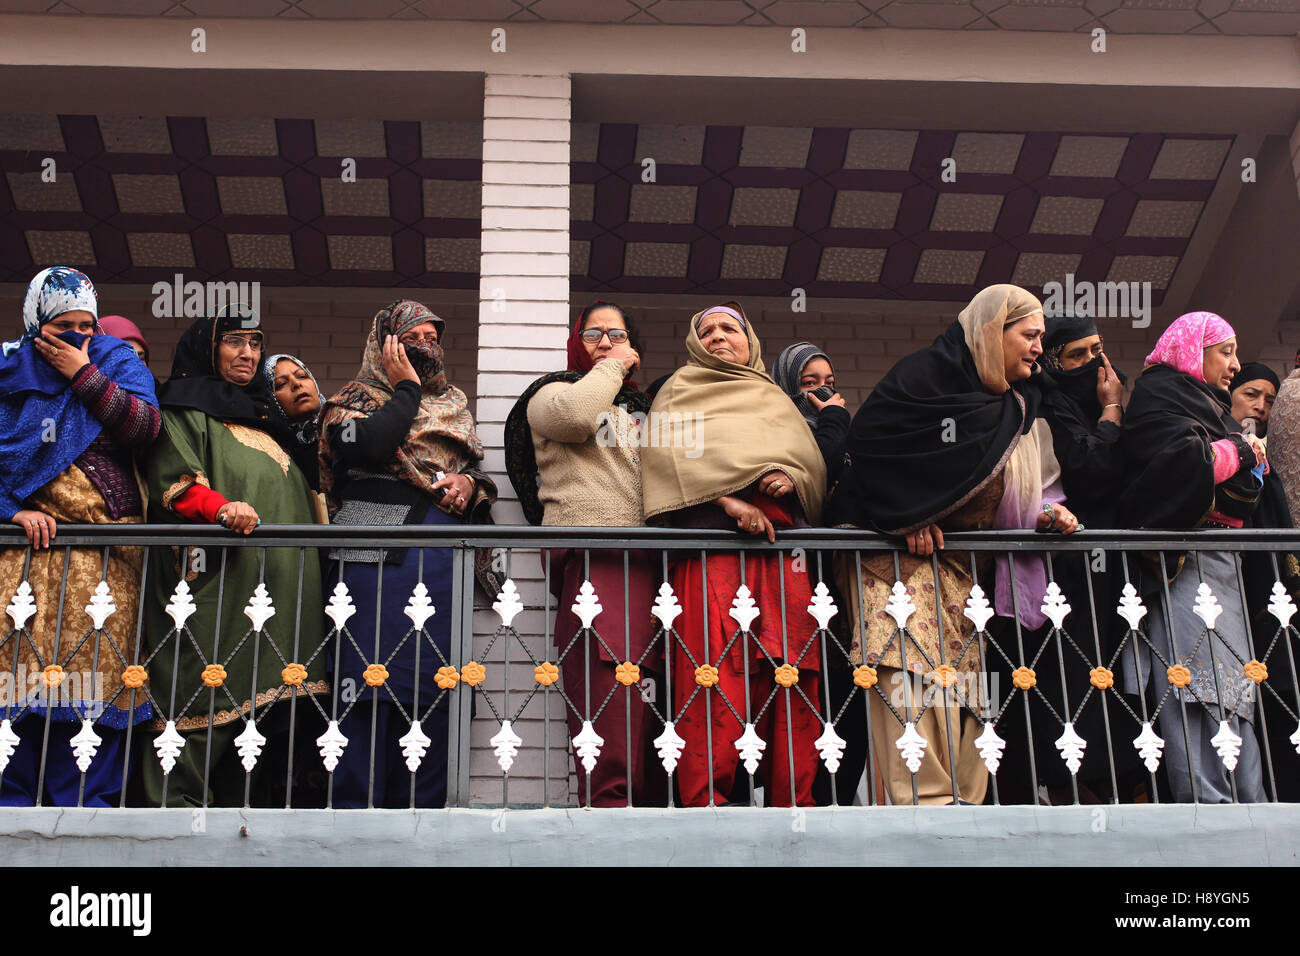 Amid tears, sobs, relatives and neighbors of Ghulam Mohammad Khan, watching his funeral procession while his body is being taken for burial in the outskirts of Srinagar, Indian Controlled Kashmir, on Thursday, November 17, 2016. Khan succumbed to his injuries early Thursday, after he was allegedly hit by a tear gas shell fired by Indian forces earlier this month during an anti-India protest. Stock Photo